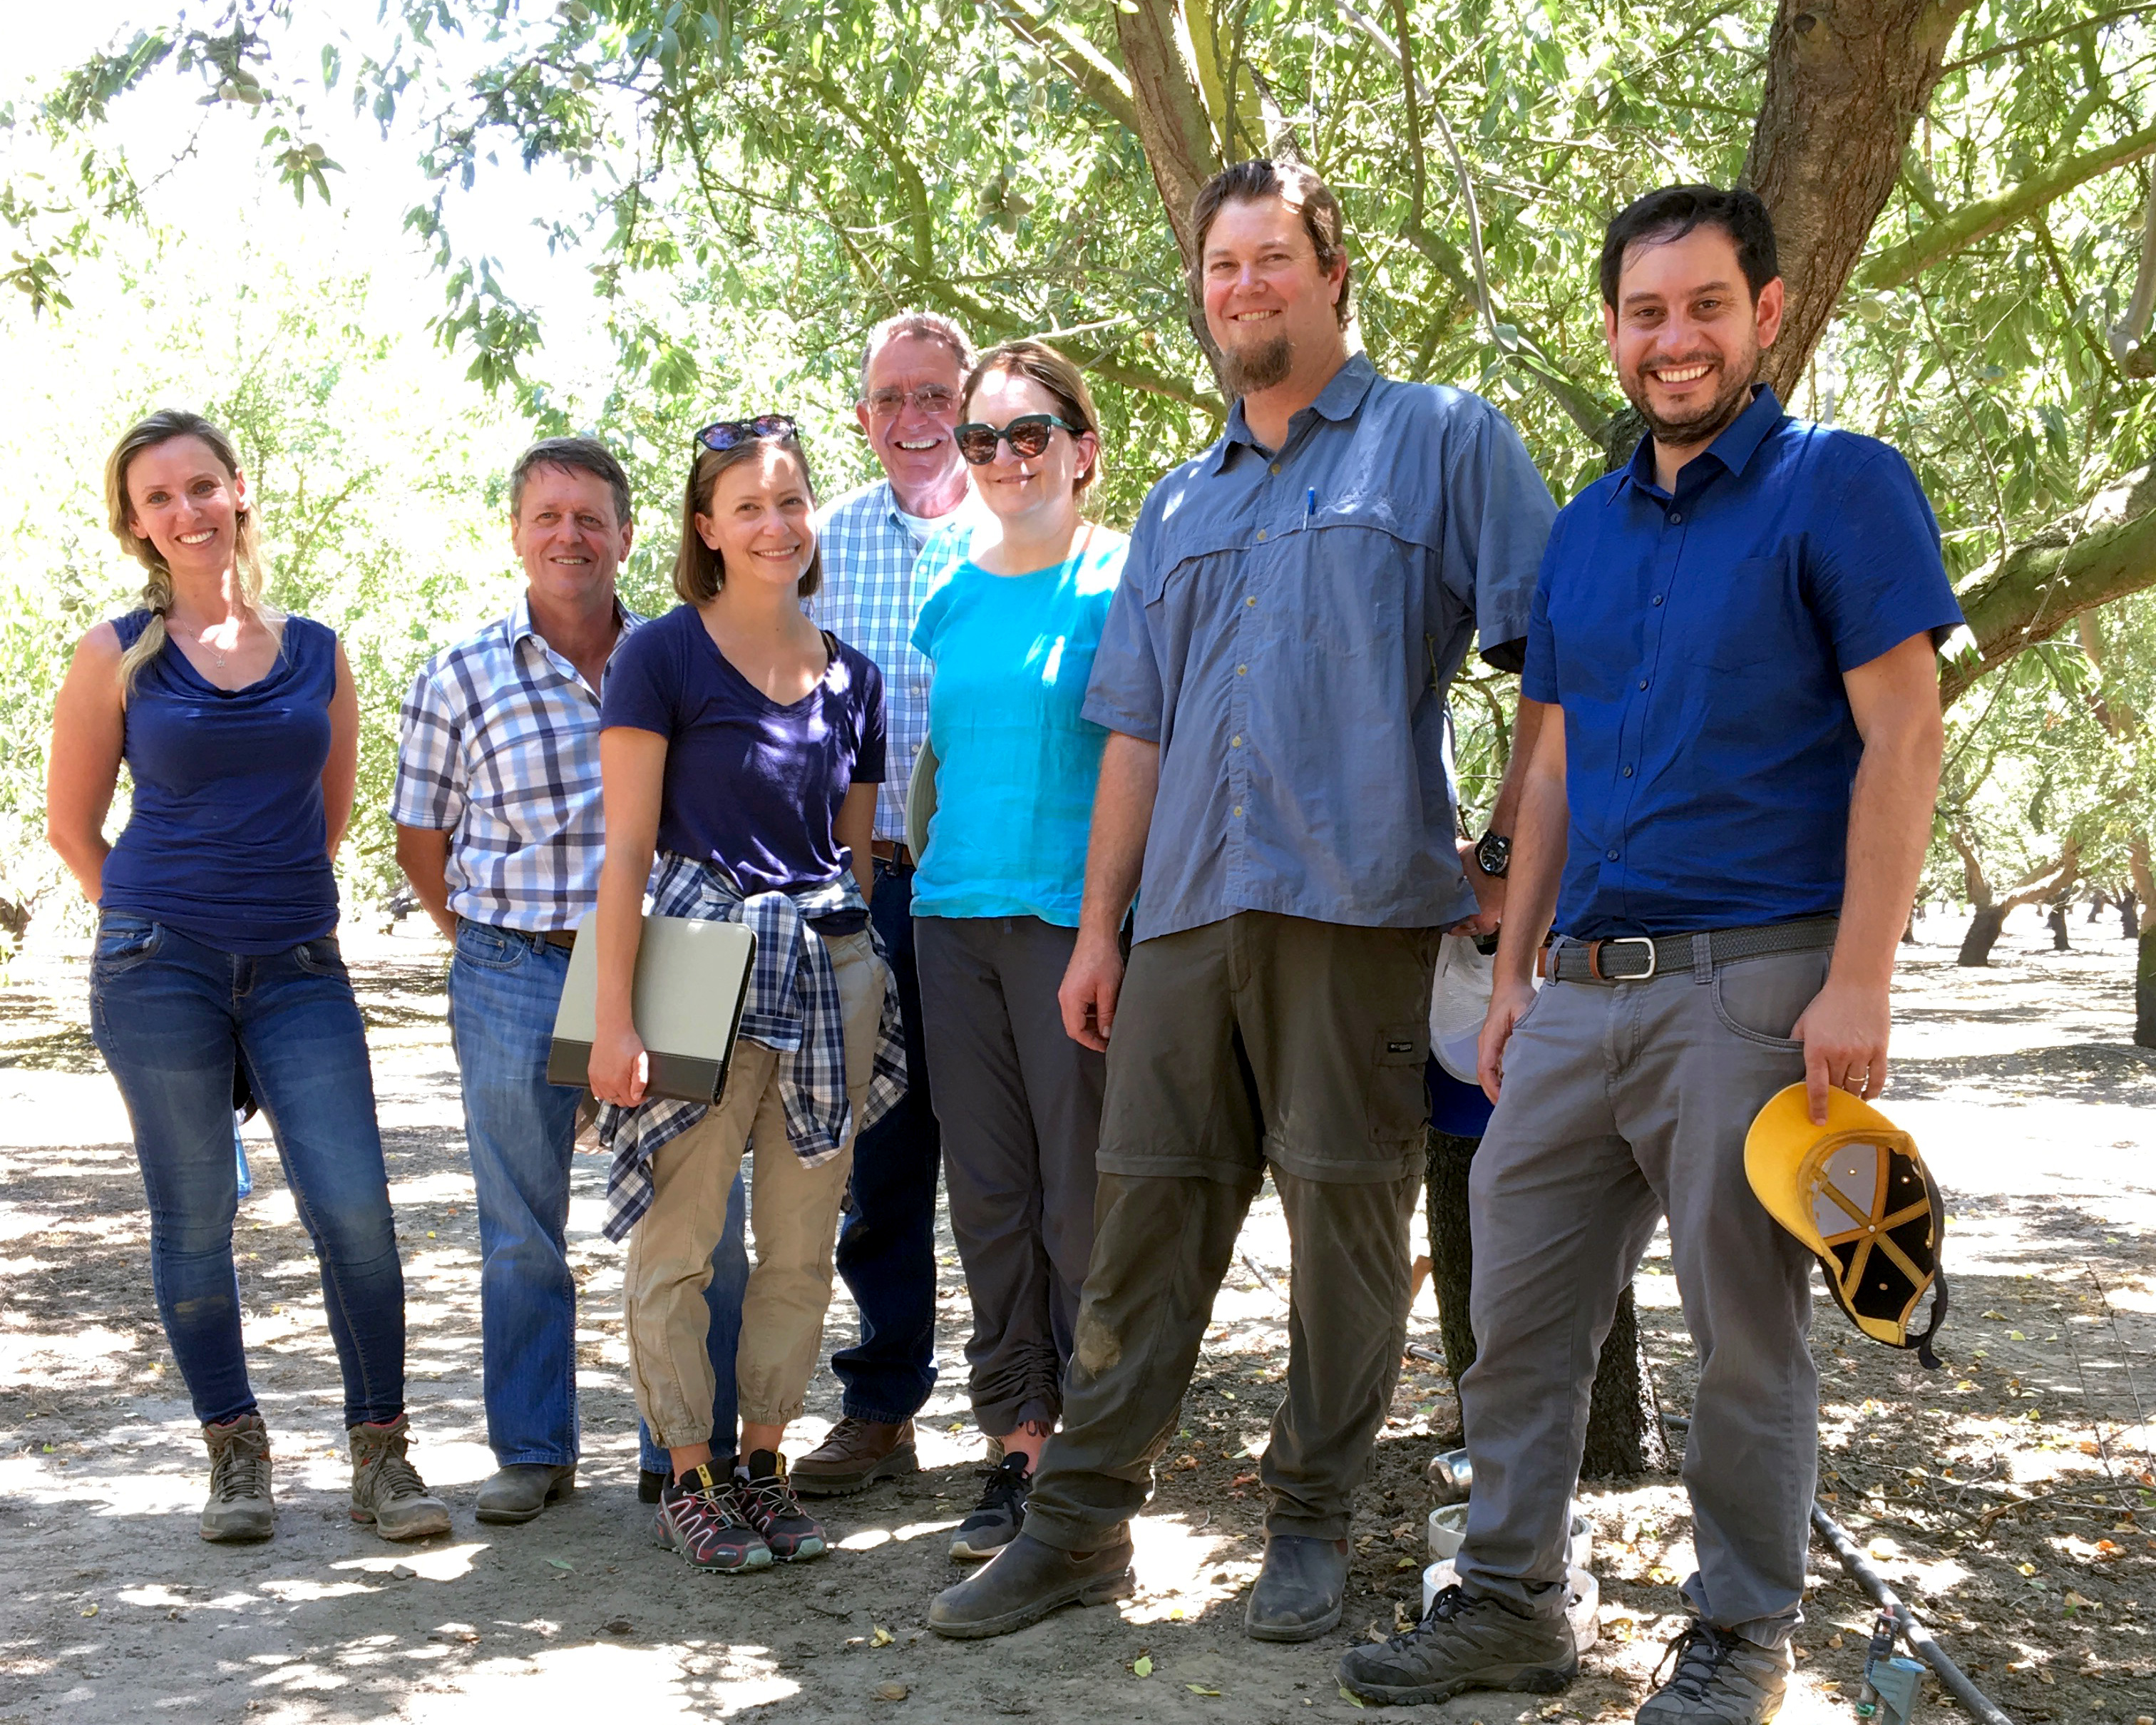 Collaborators gather to study nitrogen efficiency in a Modesto almond orchard, including, from left, postdoctoral researcher Hanna Ouaknin; Professor Patrick Brown; Ph.D. student Jessica Rudnick; grower Art Bowman; Professor Gail Taylor; Ph.D. student Patrick Nichols; and Sebastian Saa Silver, UC Davis alum and agricultural researcher with the California Almond Board.